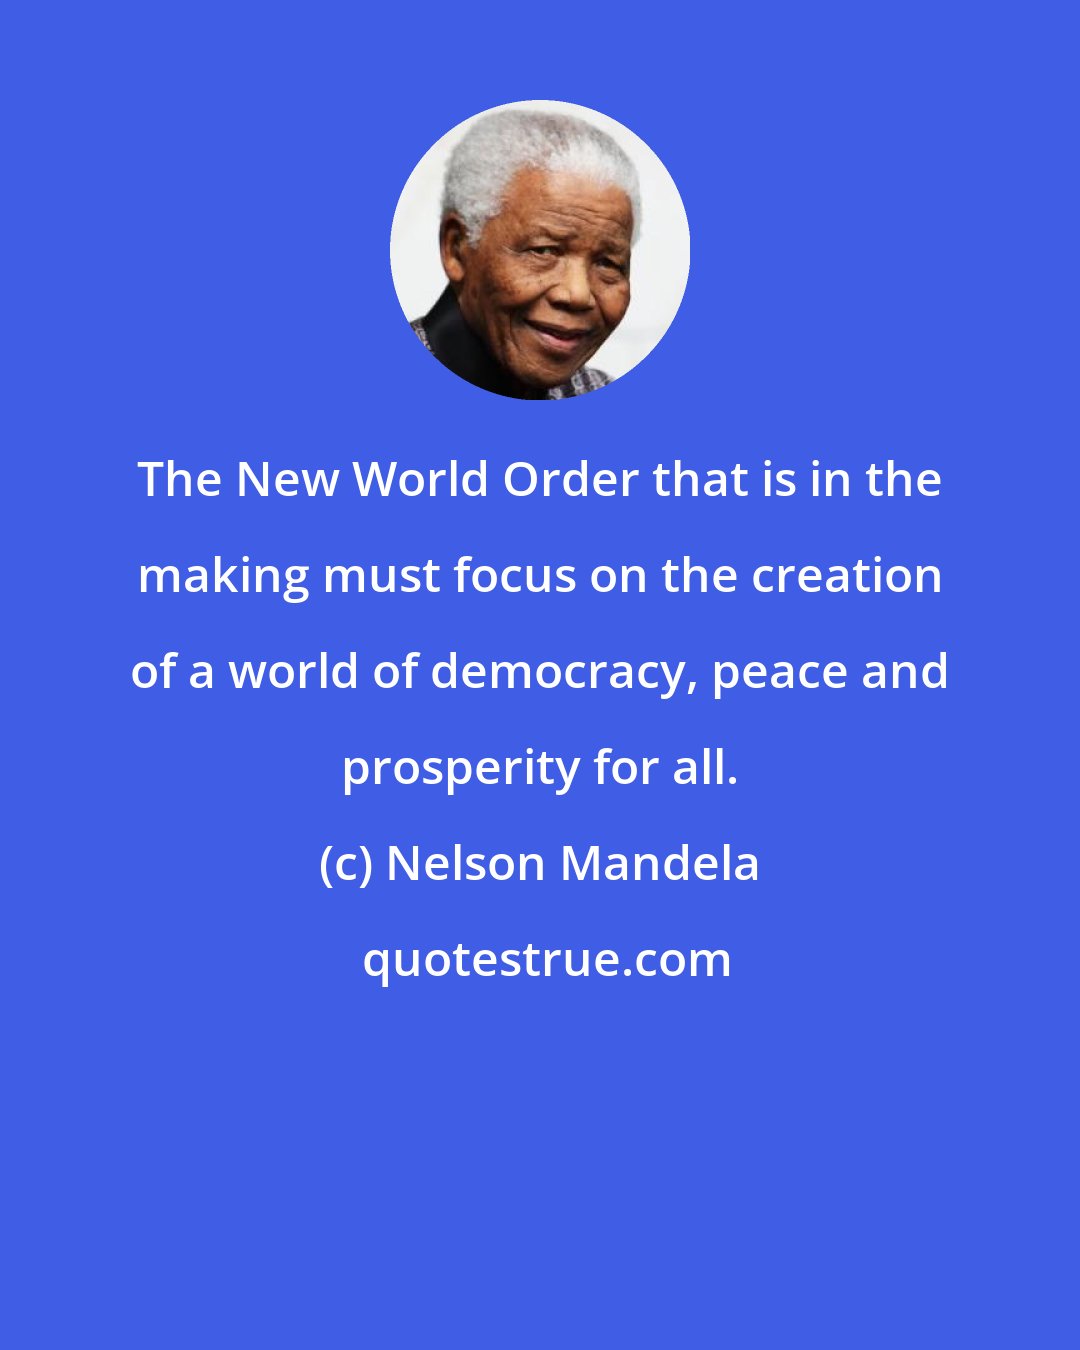 Nelson Mandela: The New World Order that is in the making must focus on the creation of a world of democracy, peace and prosperity for all.